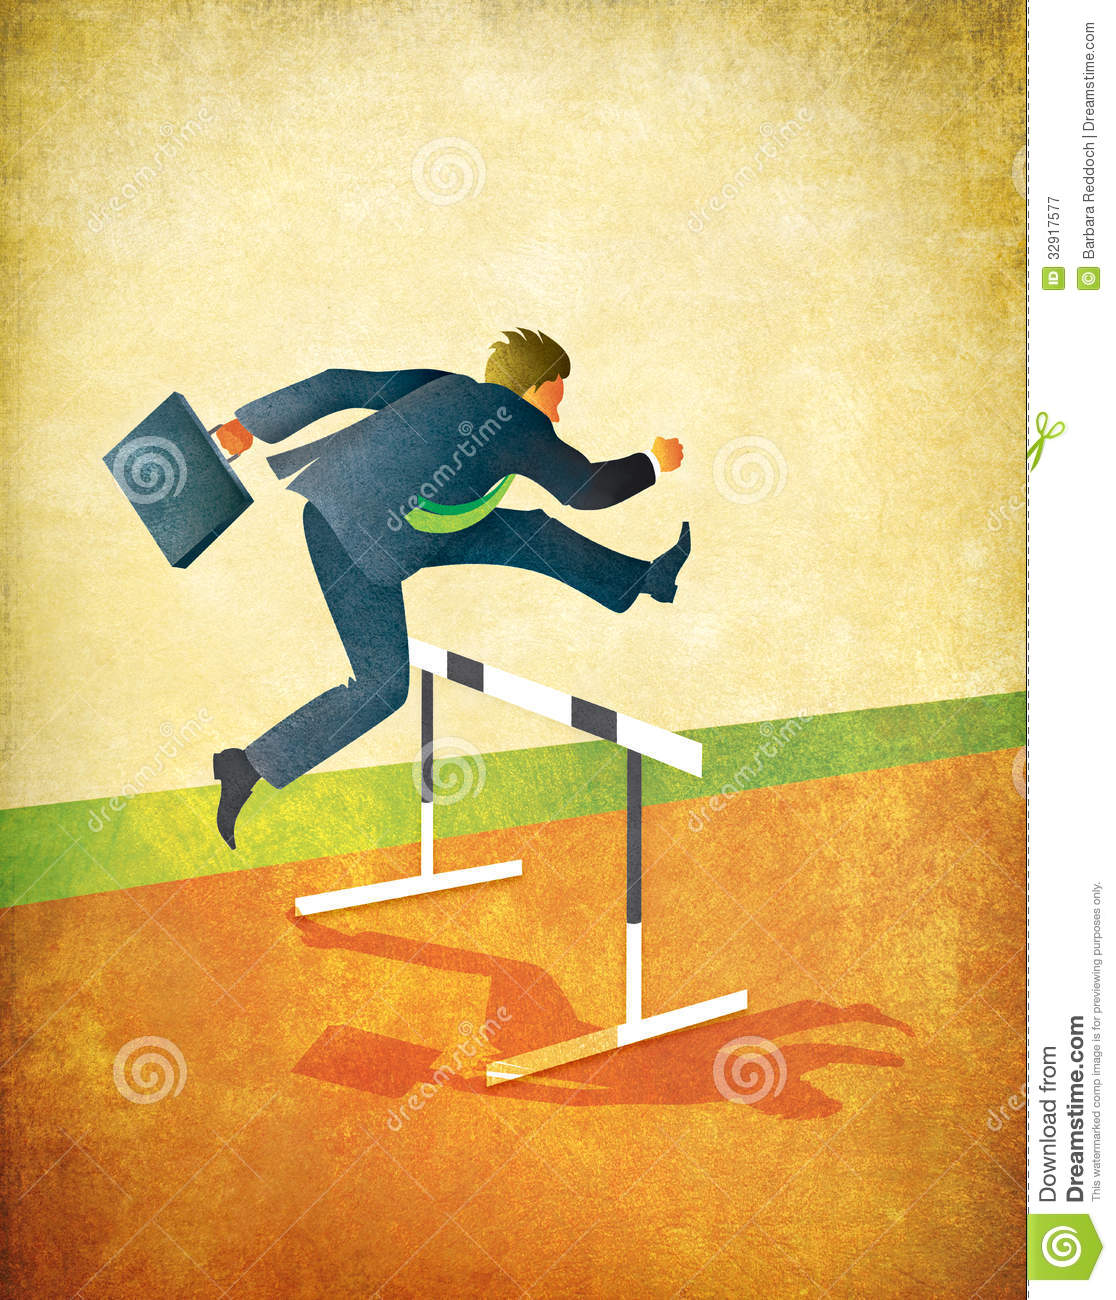 Of Businessman With Briefcase Jumping Over Hurdles On Running    